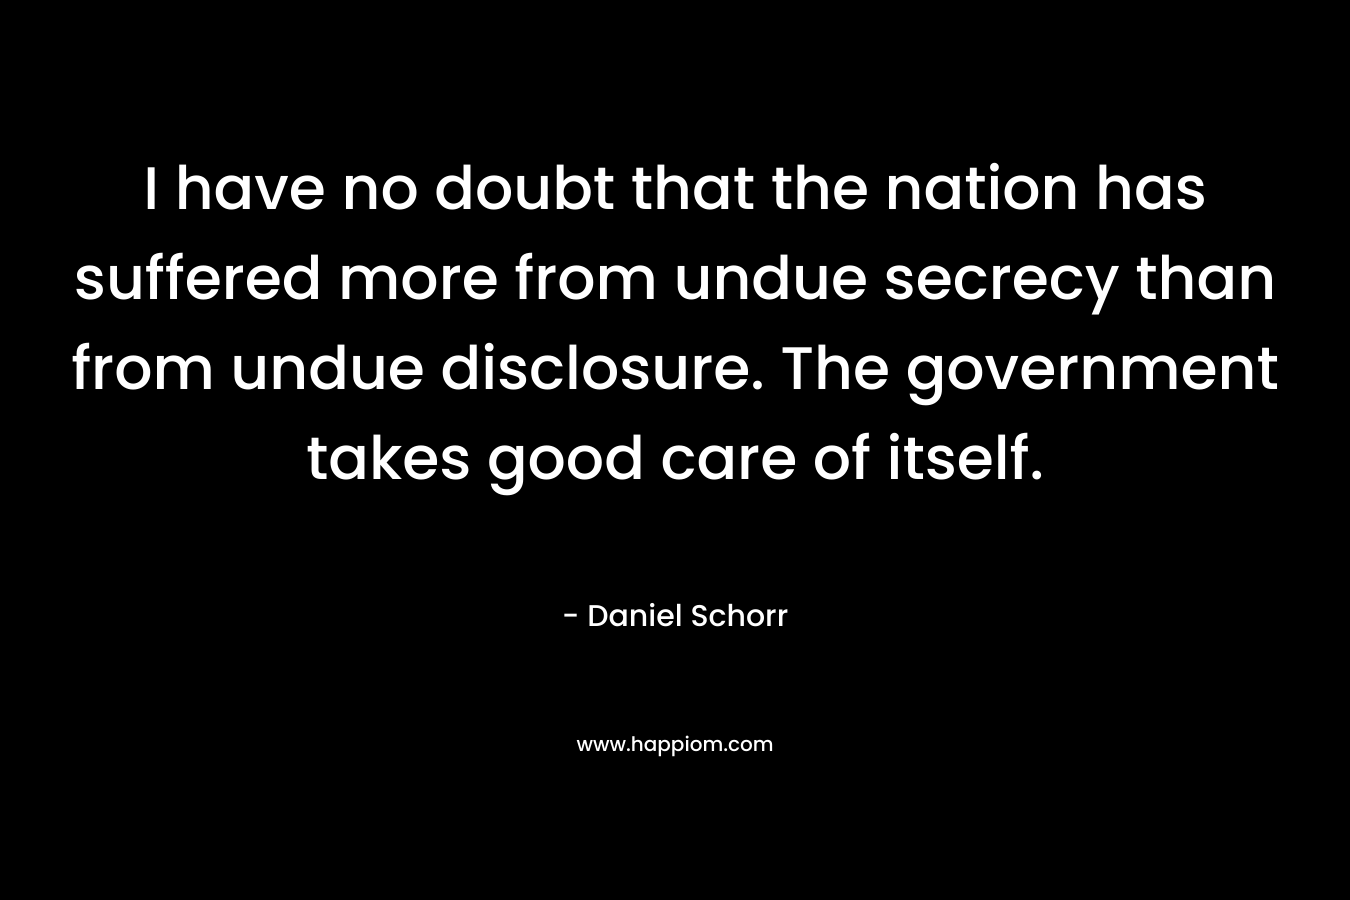 I have no doubt that the nation has suffered more from undue secrecy than from undue disclosure. The government takes good care of itself. – Daniel Schorr